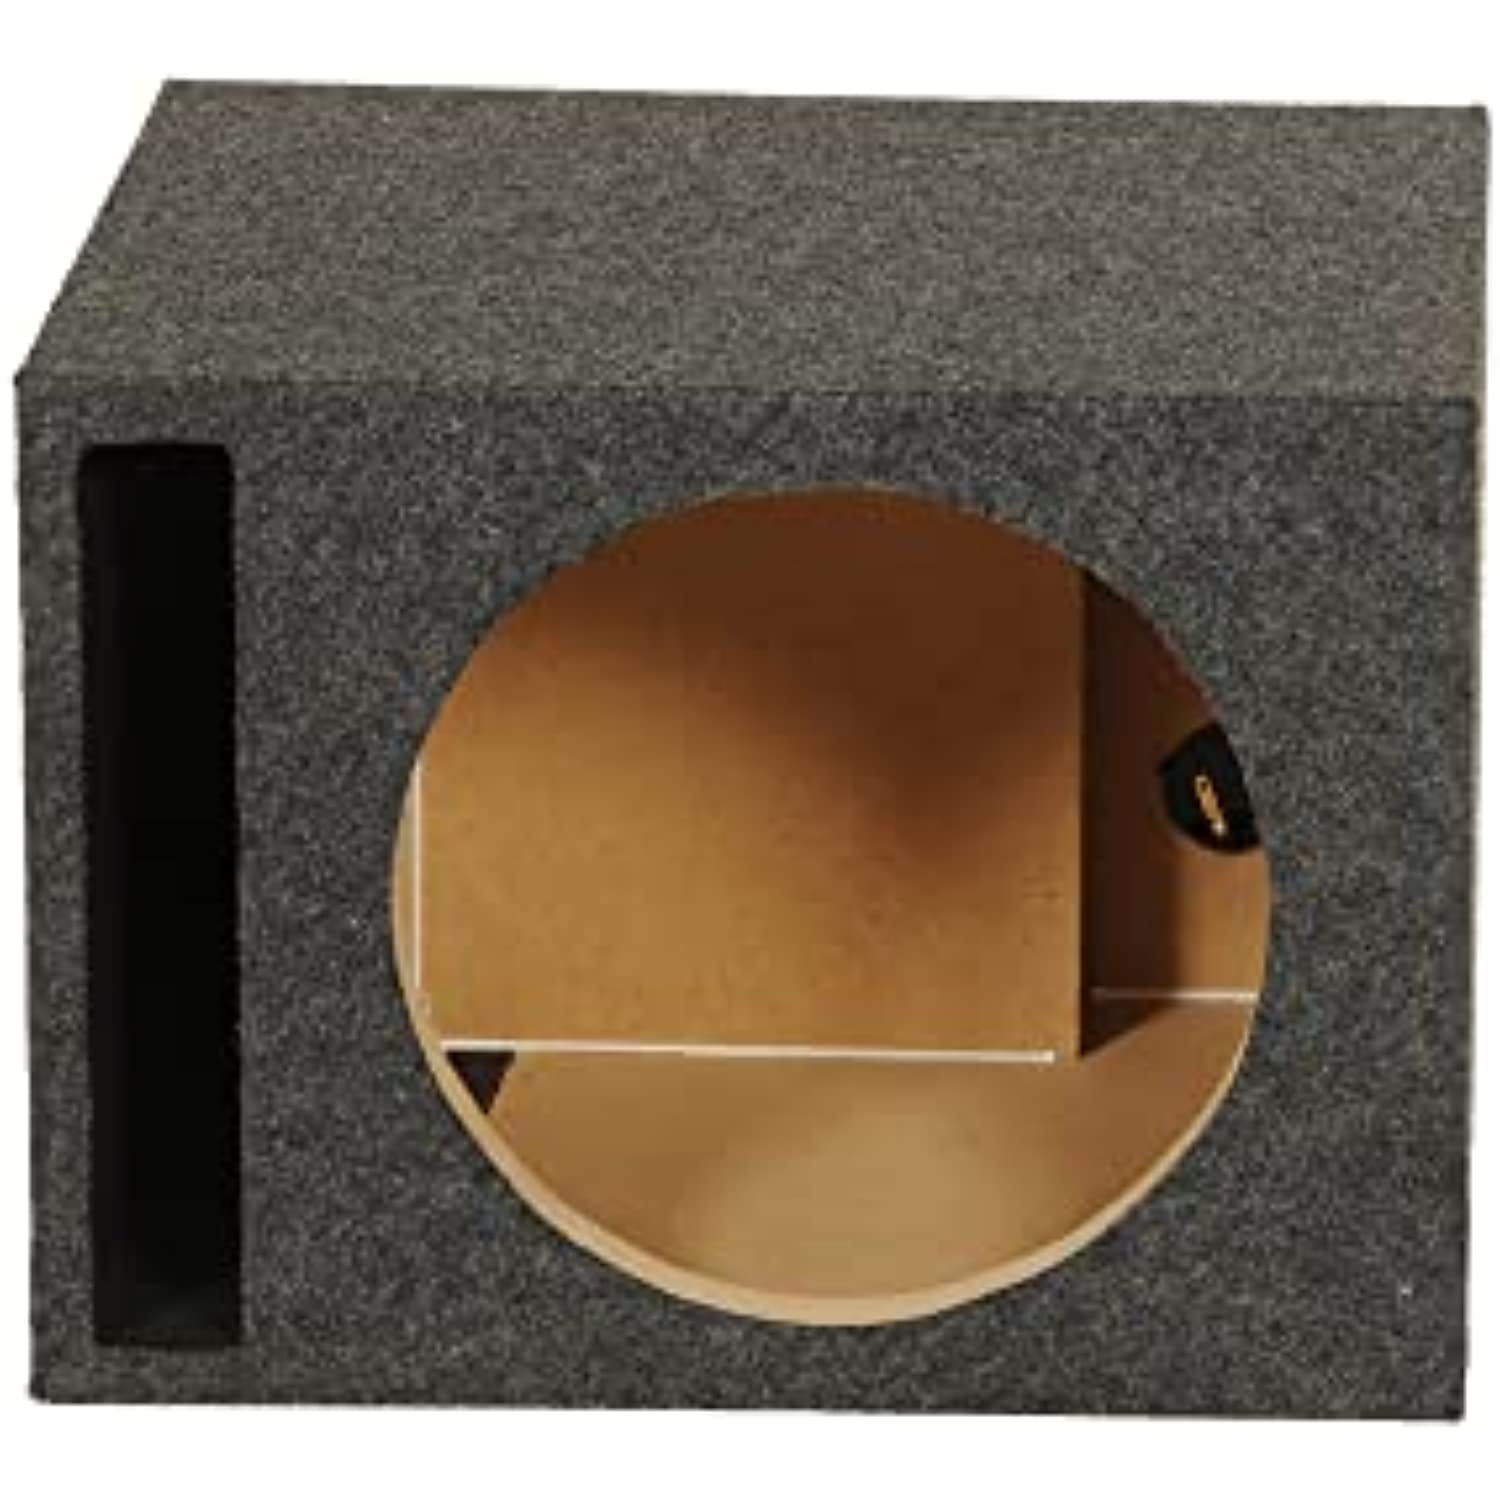 Q Power HD110 Vented Single 10" Ported Heavy Duty Subwoofer Enclosure